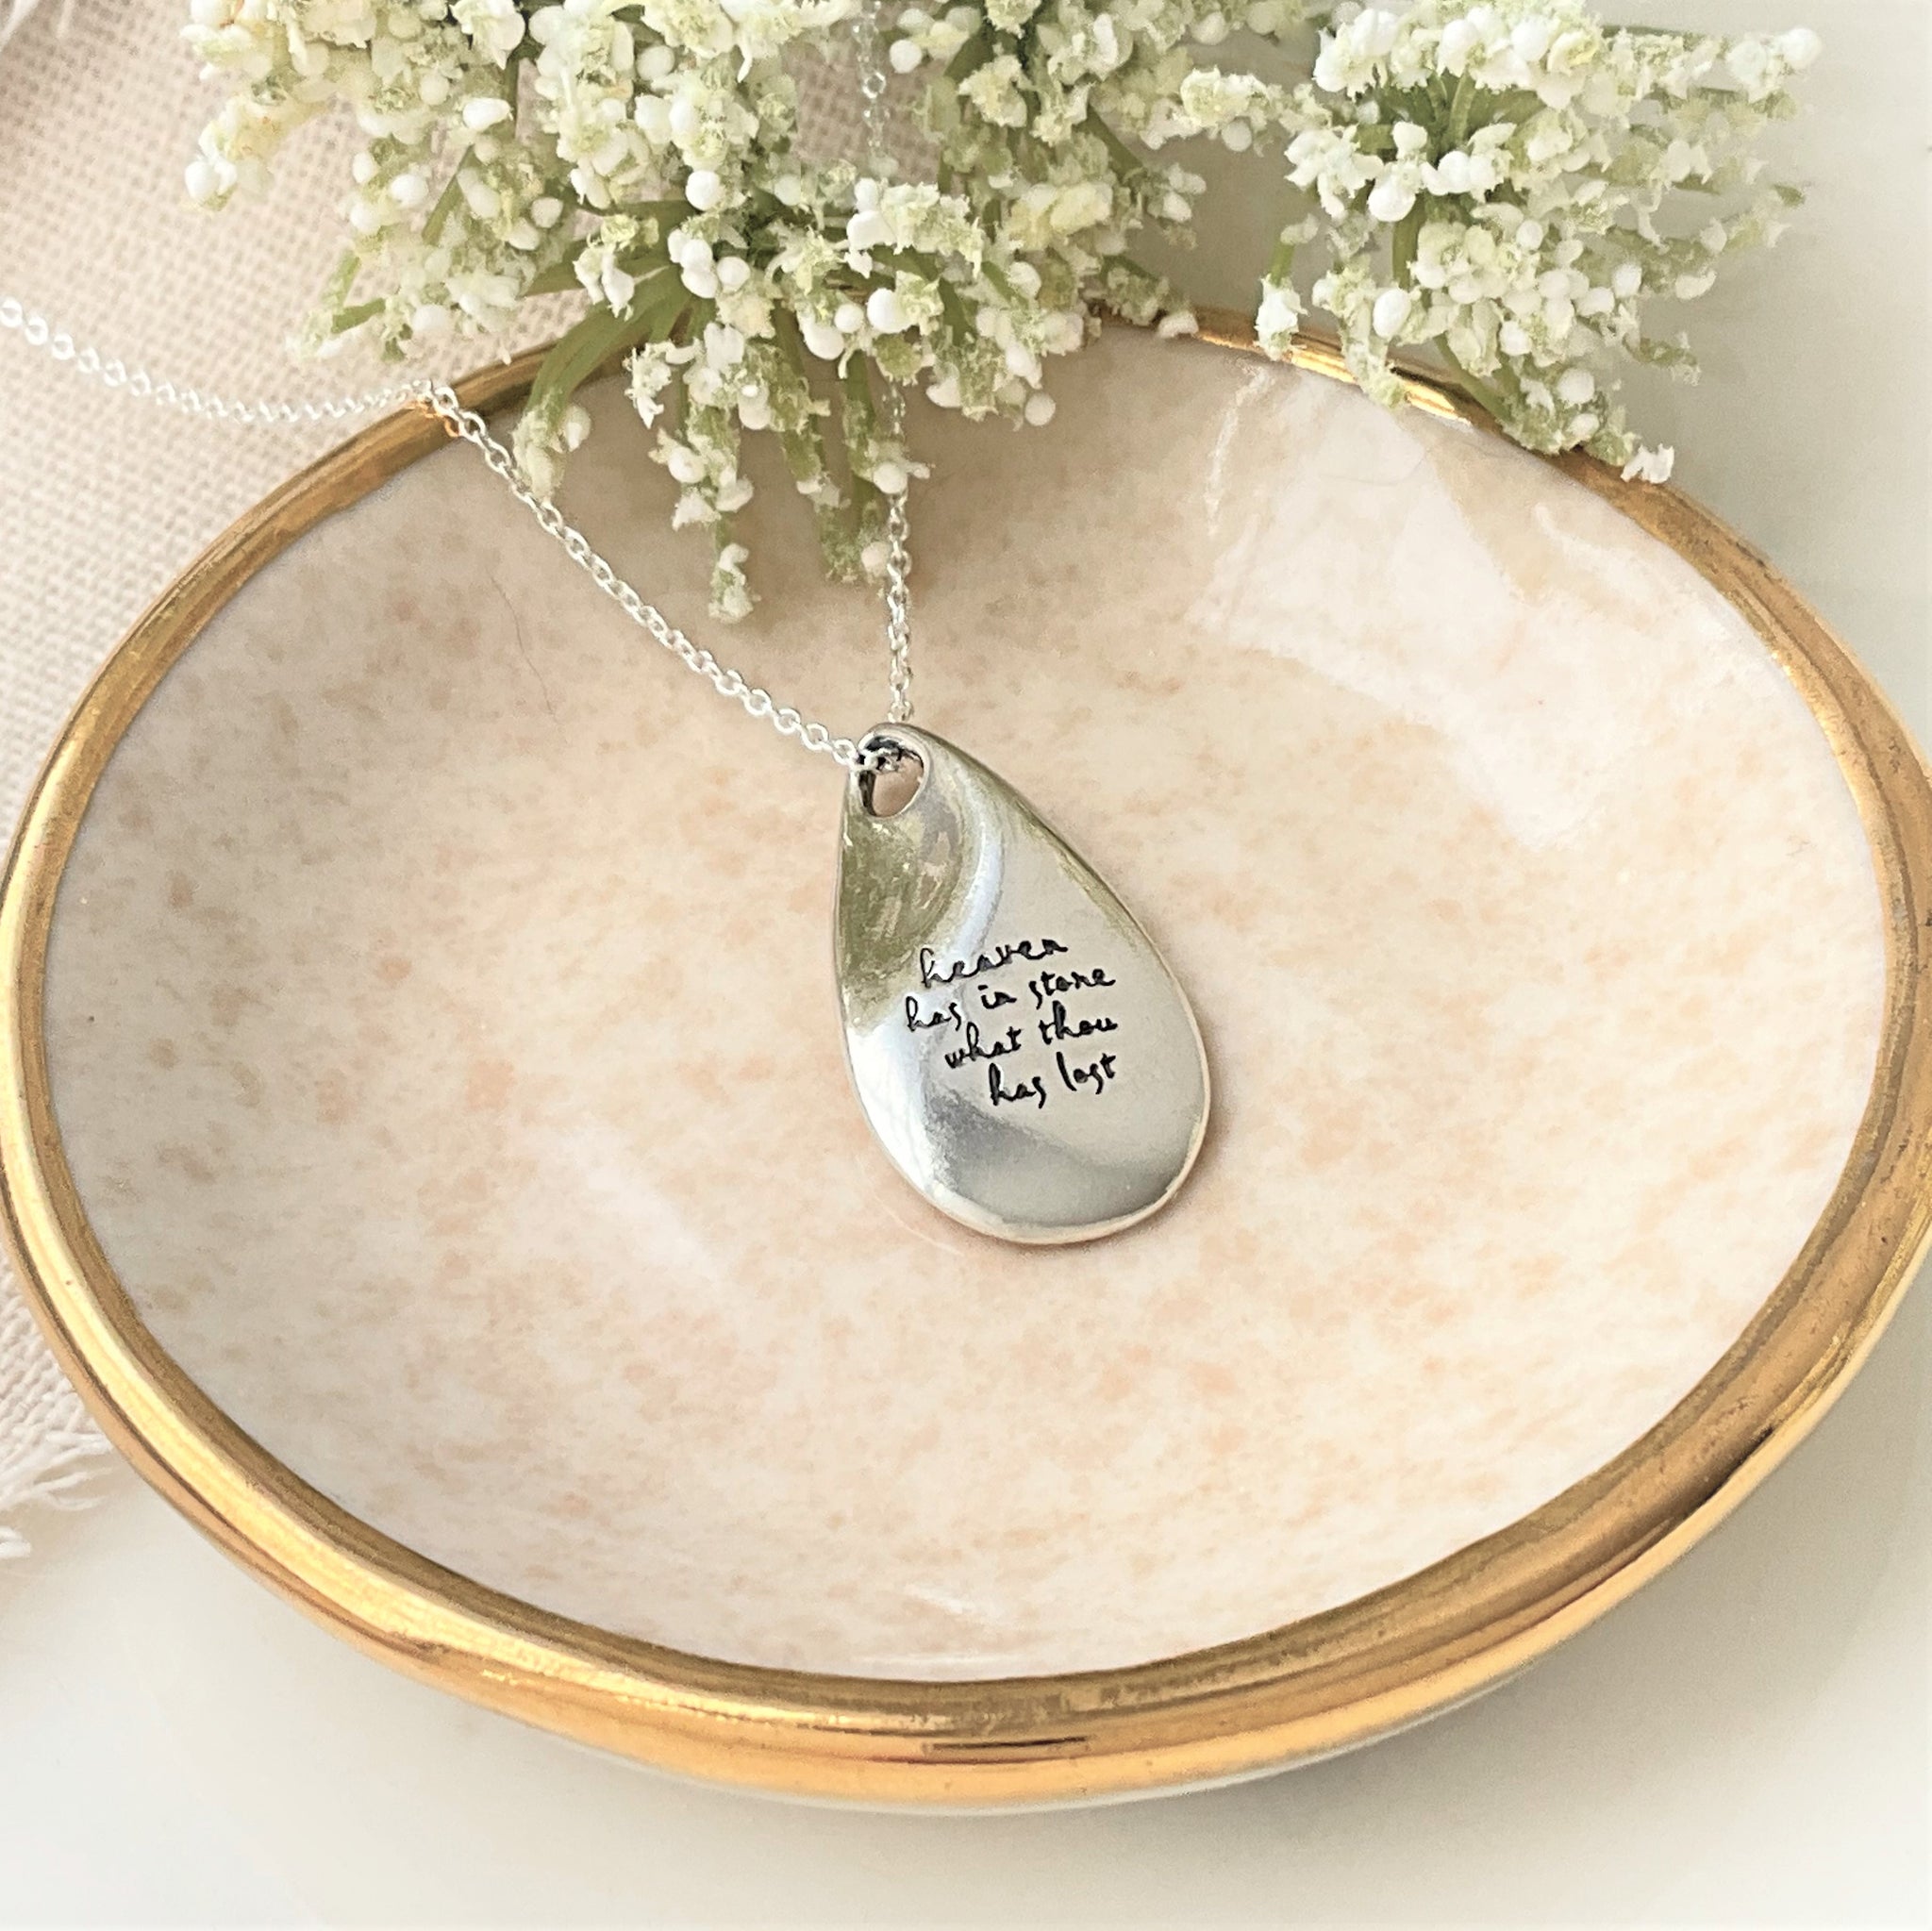 Buy MYADDICTION Cremation Urn Necklace Memorial Gift Ash Holder Charms for  Pets Human Ash Jewelry & Watches | Fashion Jewelry | Necklaces & Pendants  at Amazon.in